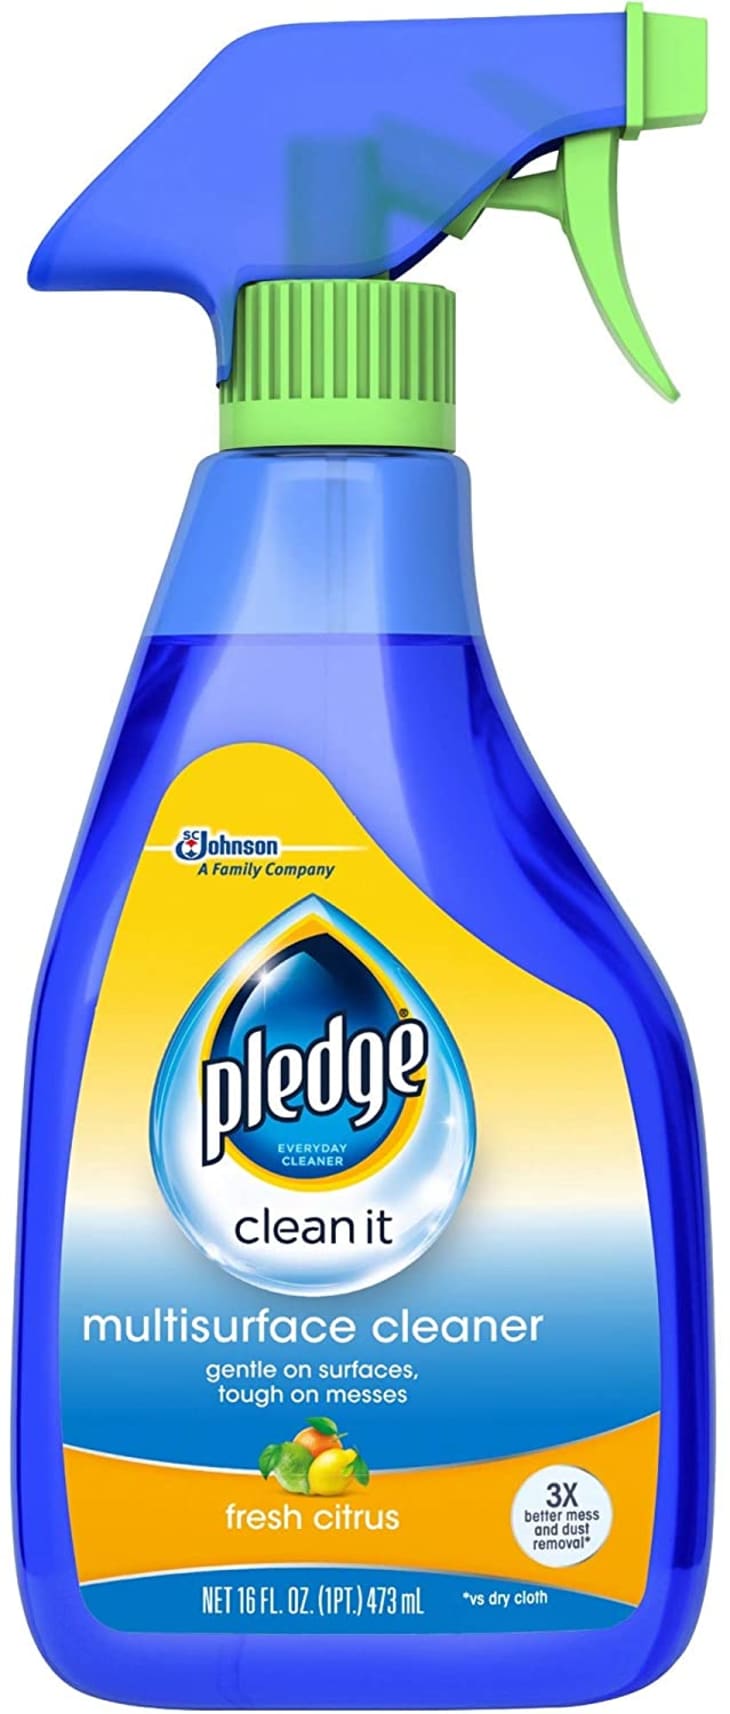 Pledge Multisurface Everyday Cleaner at Amazon